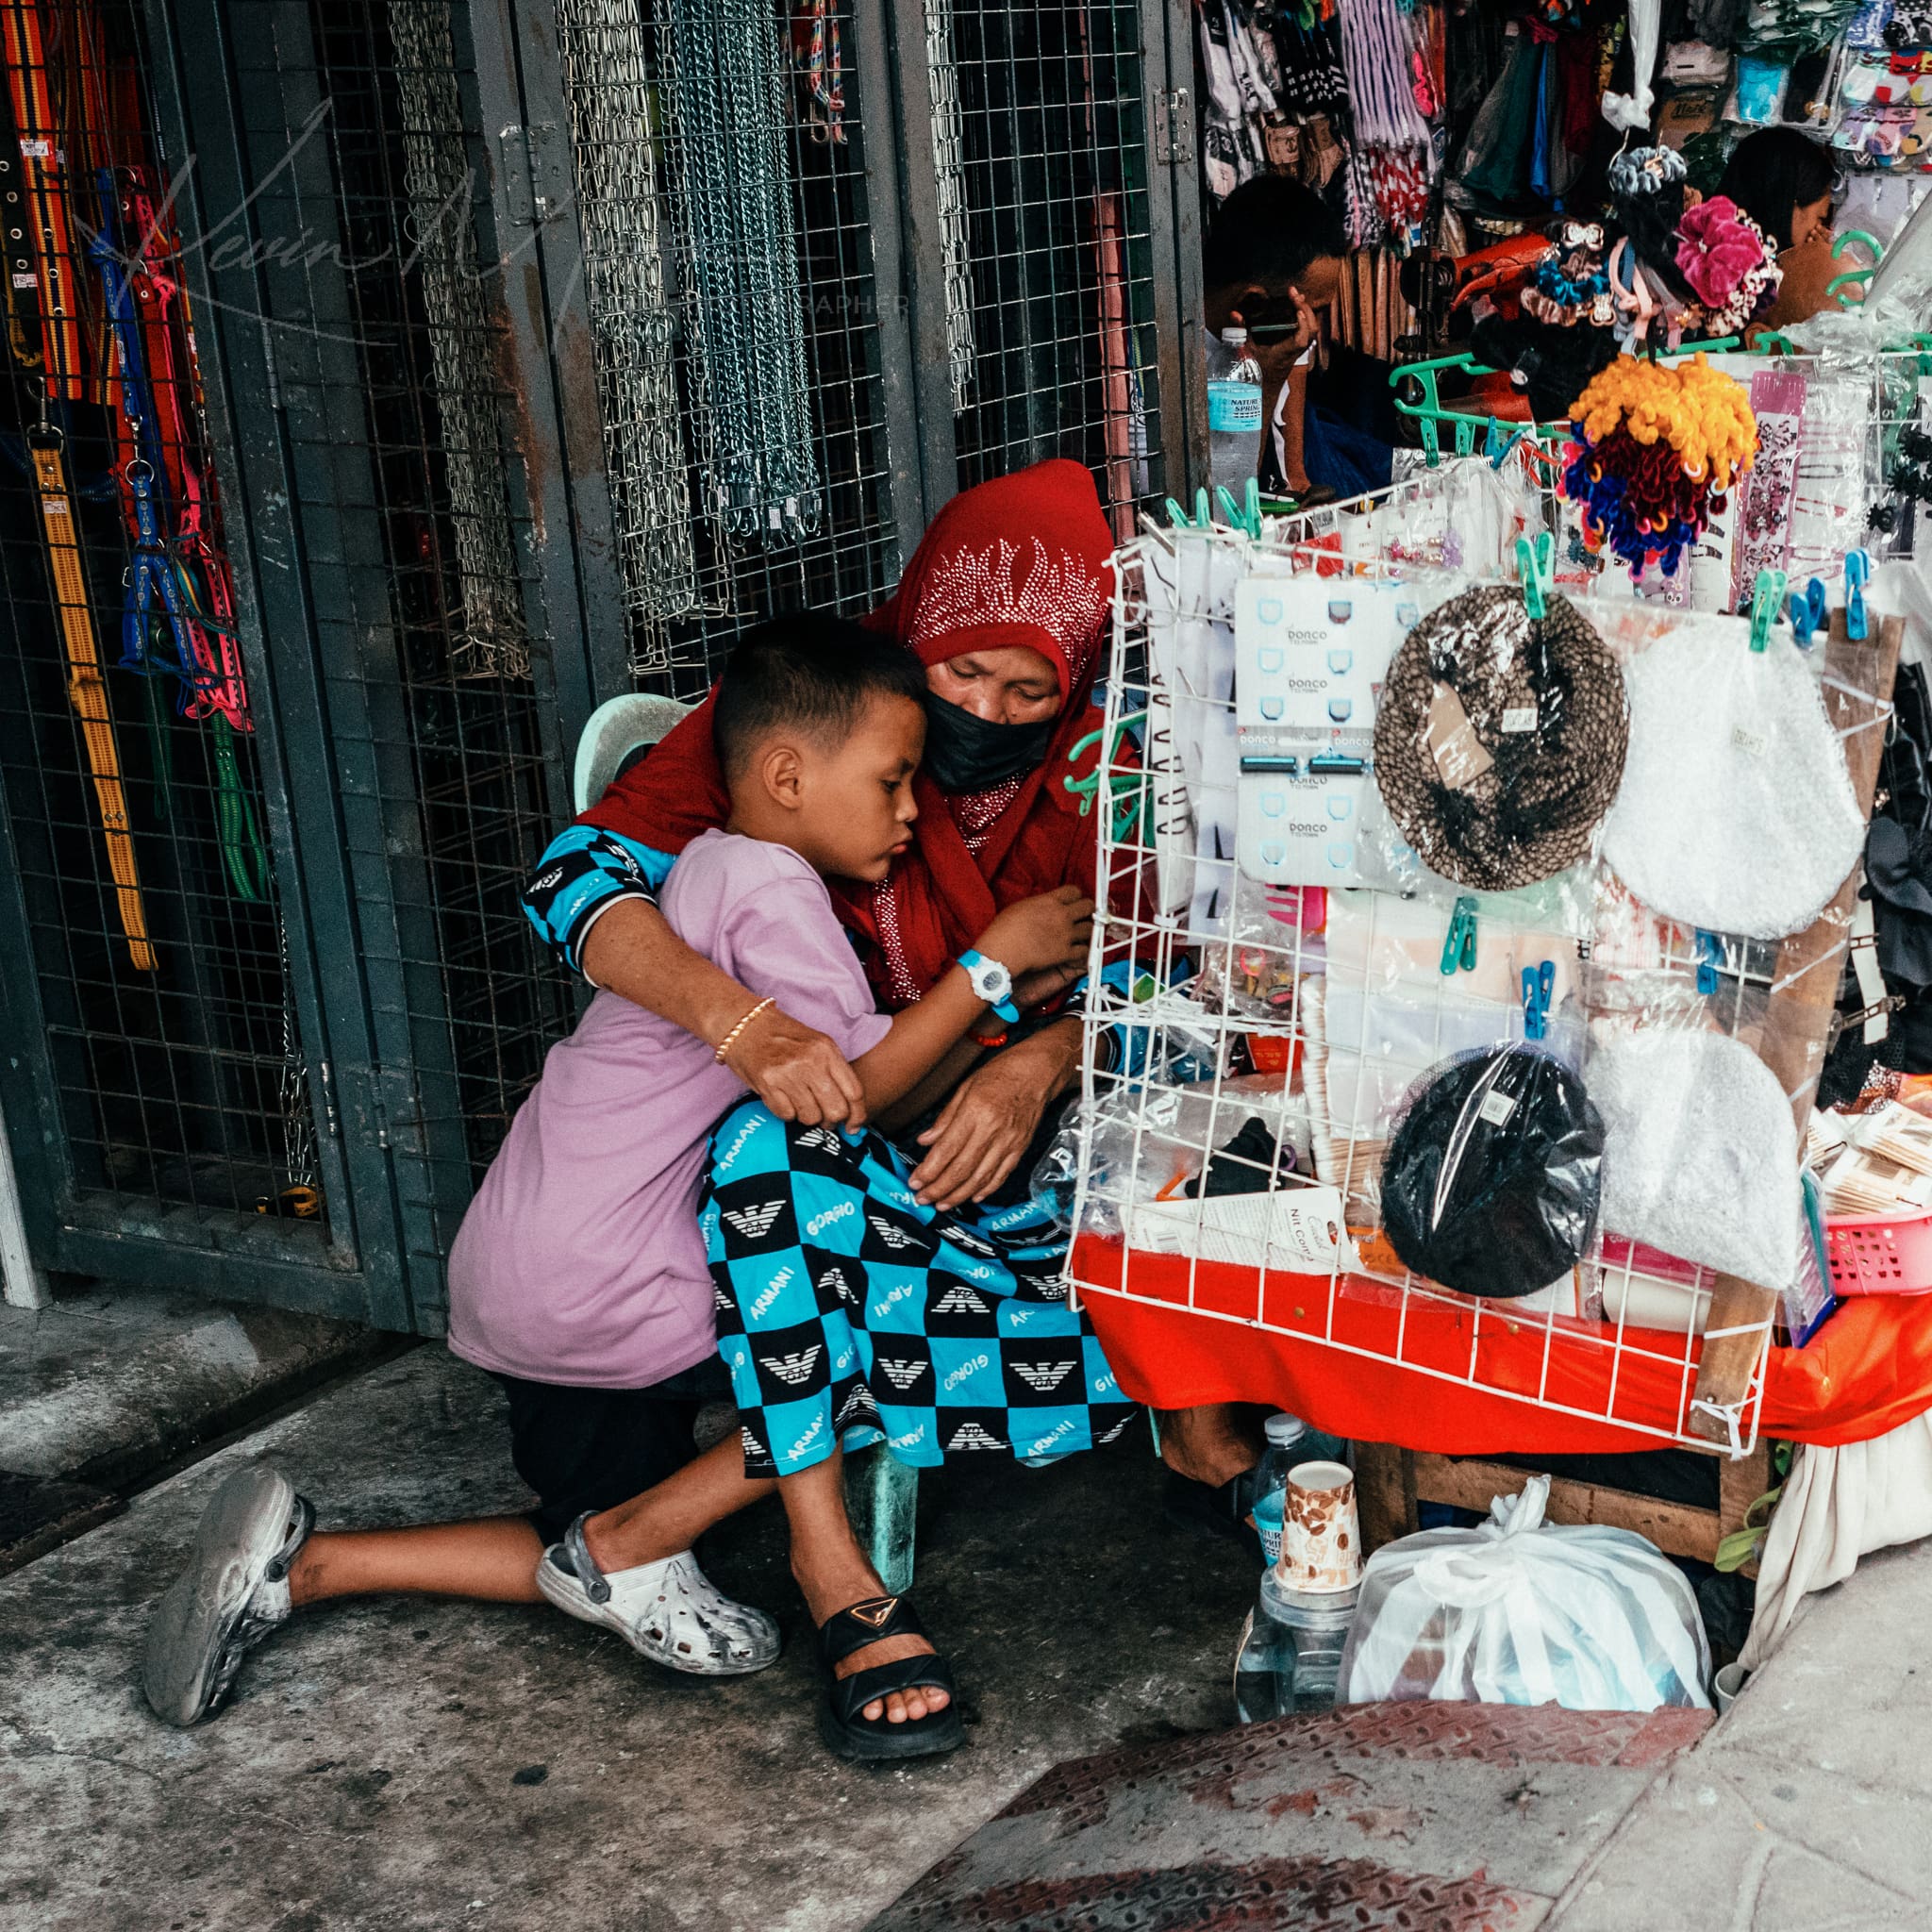 Street vendor in a red headscarf engaging with a young boy amidst a busy Philippines marketplace.